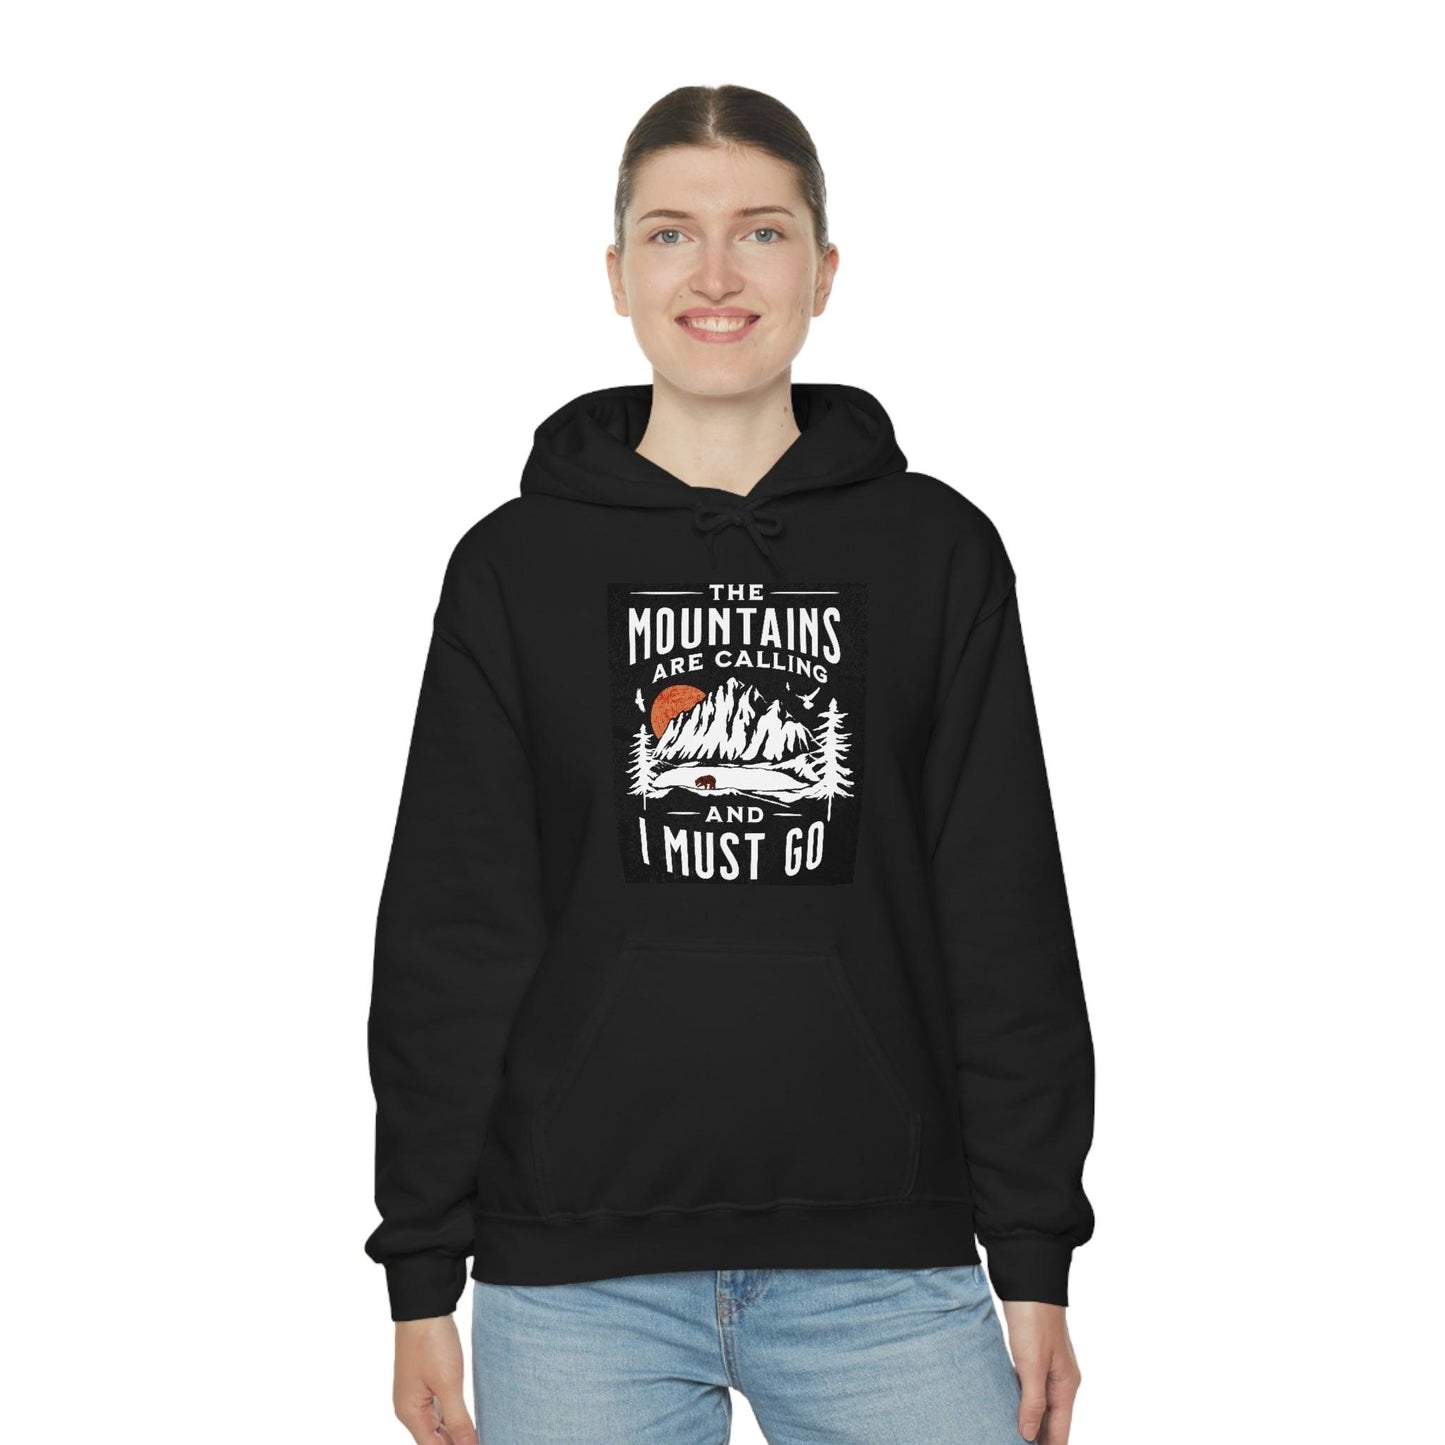 The Mountains are calling Hooded Sweatshirt